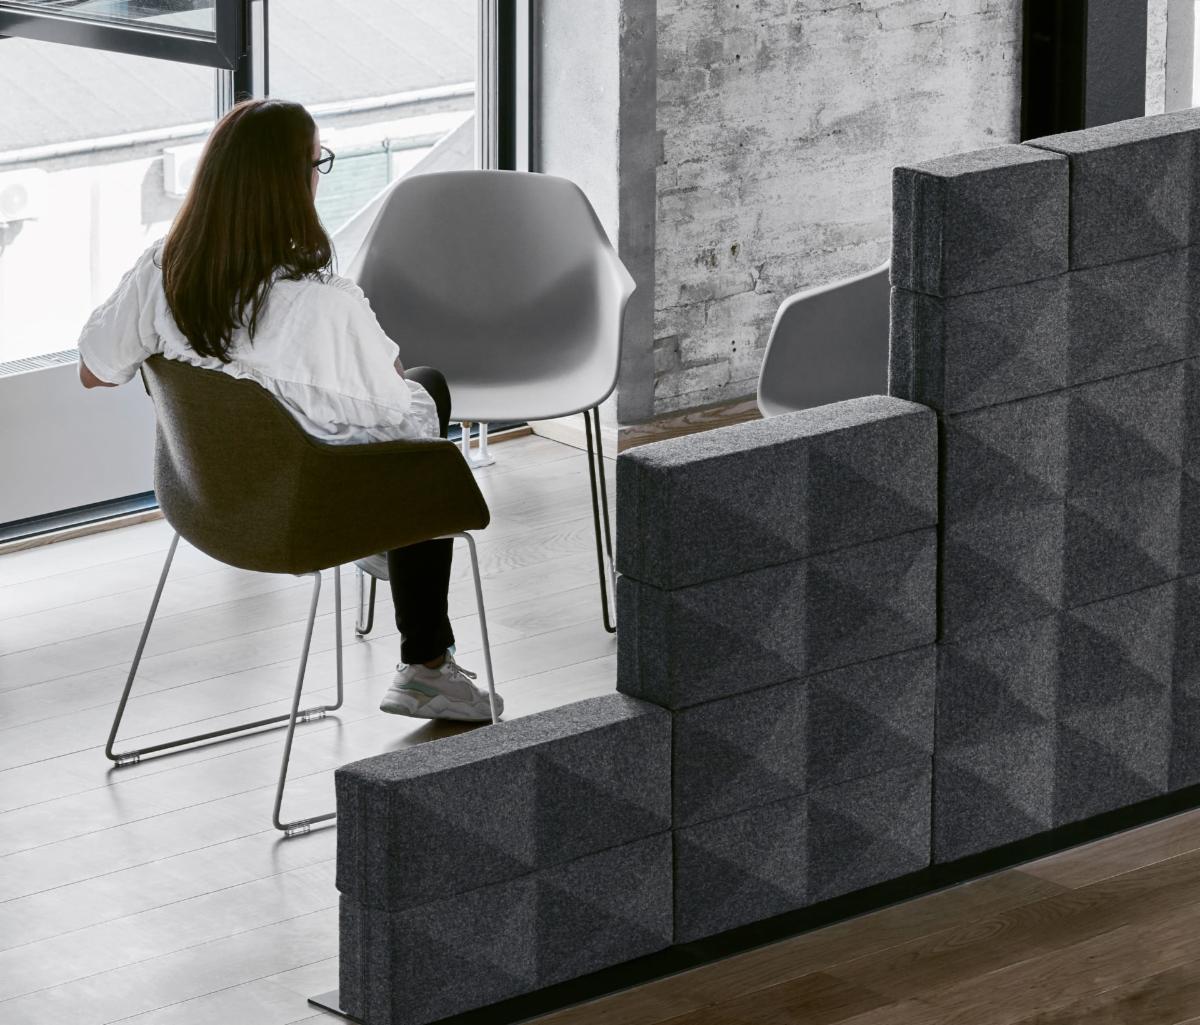 #fabricks are the perfect acoustic solution for dividing spaces. As seen at @tmrqld and @universityofqld.

# nigelsikora, #workspace #flexiblewall #mobilewall #mobilescreen #acousticwall #acousticbricks #screen #officefitout #oceedesign #acoustic #quietspace #flexiblespace